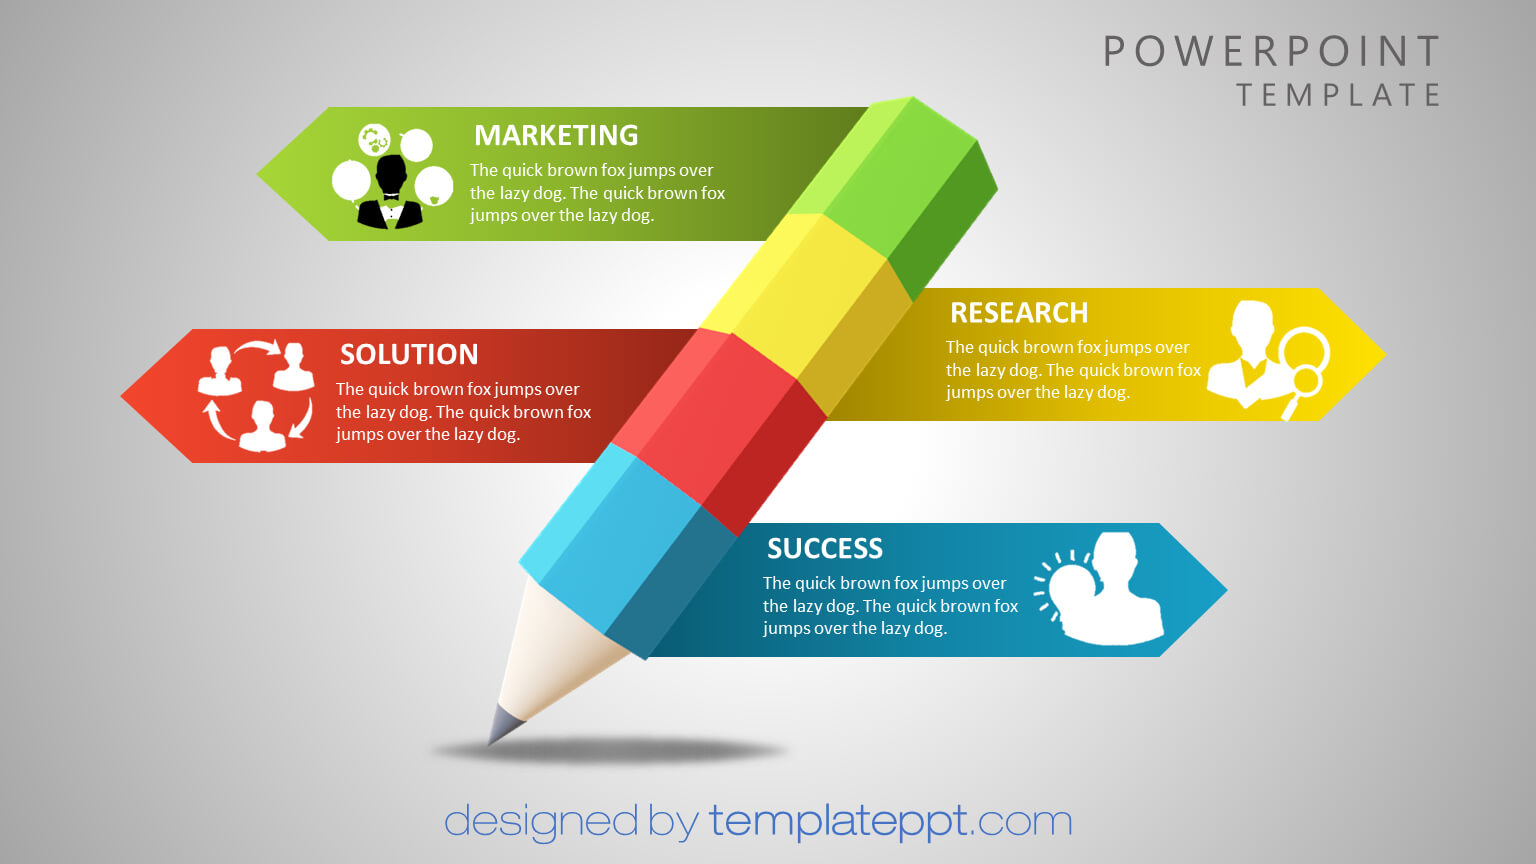 024 Animated Powerpoint Template Free Download Ideas With Powerpoint 2007 Template Free Download